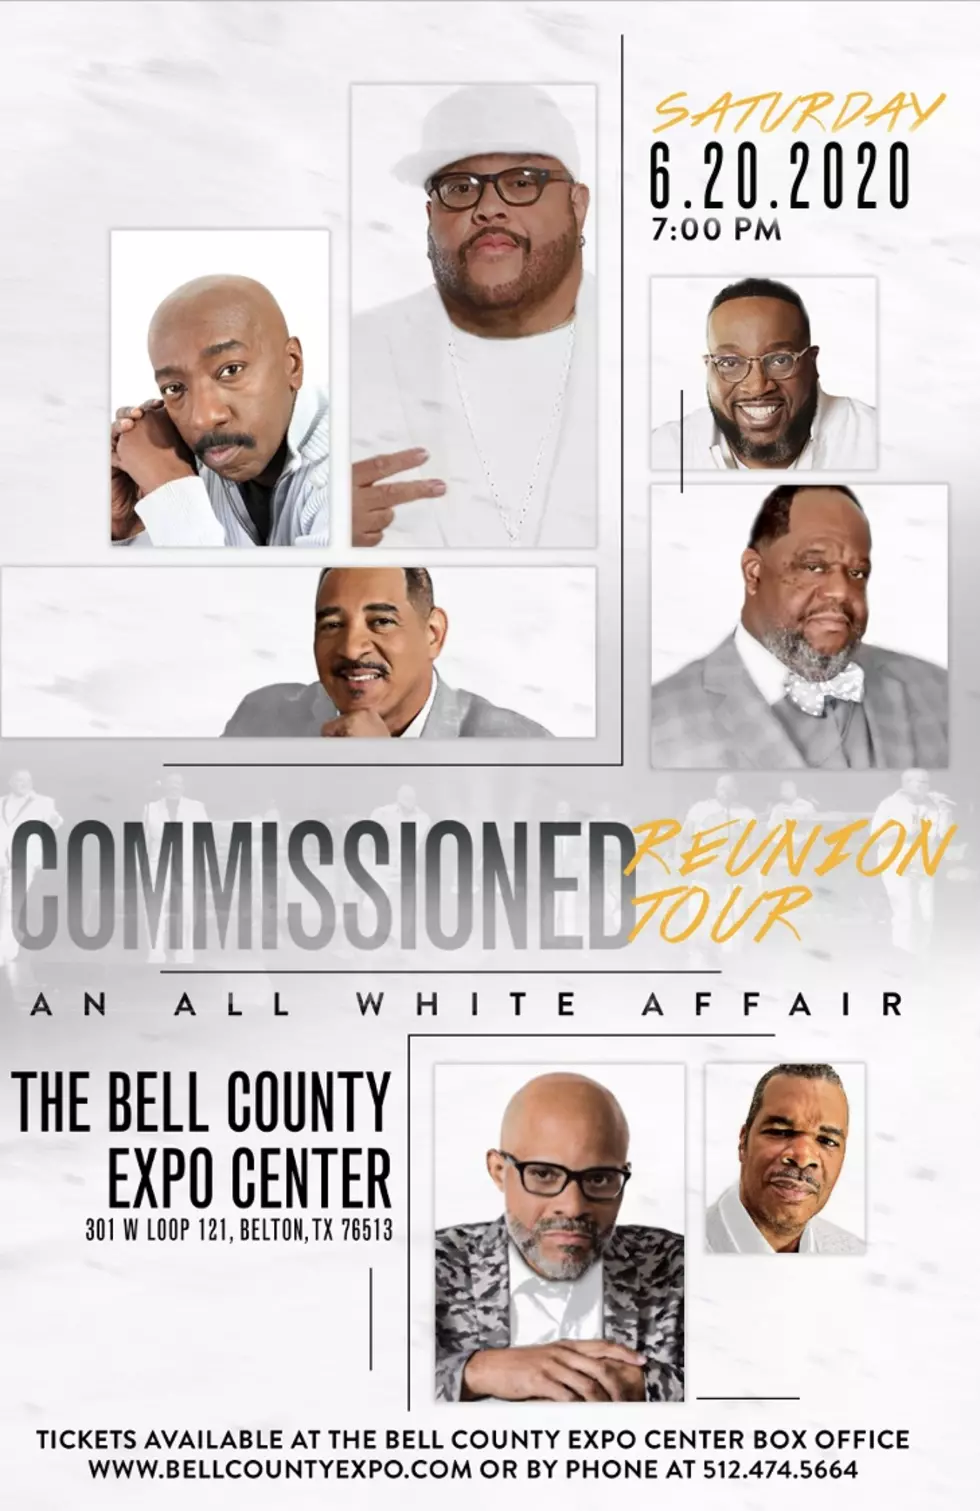 Commissioned Reunion Tour In Belton Cancelled